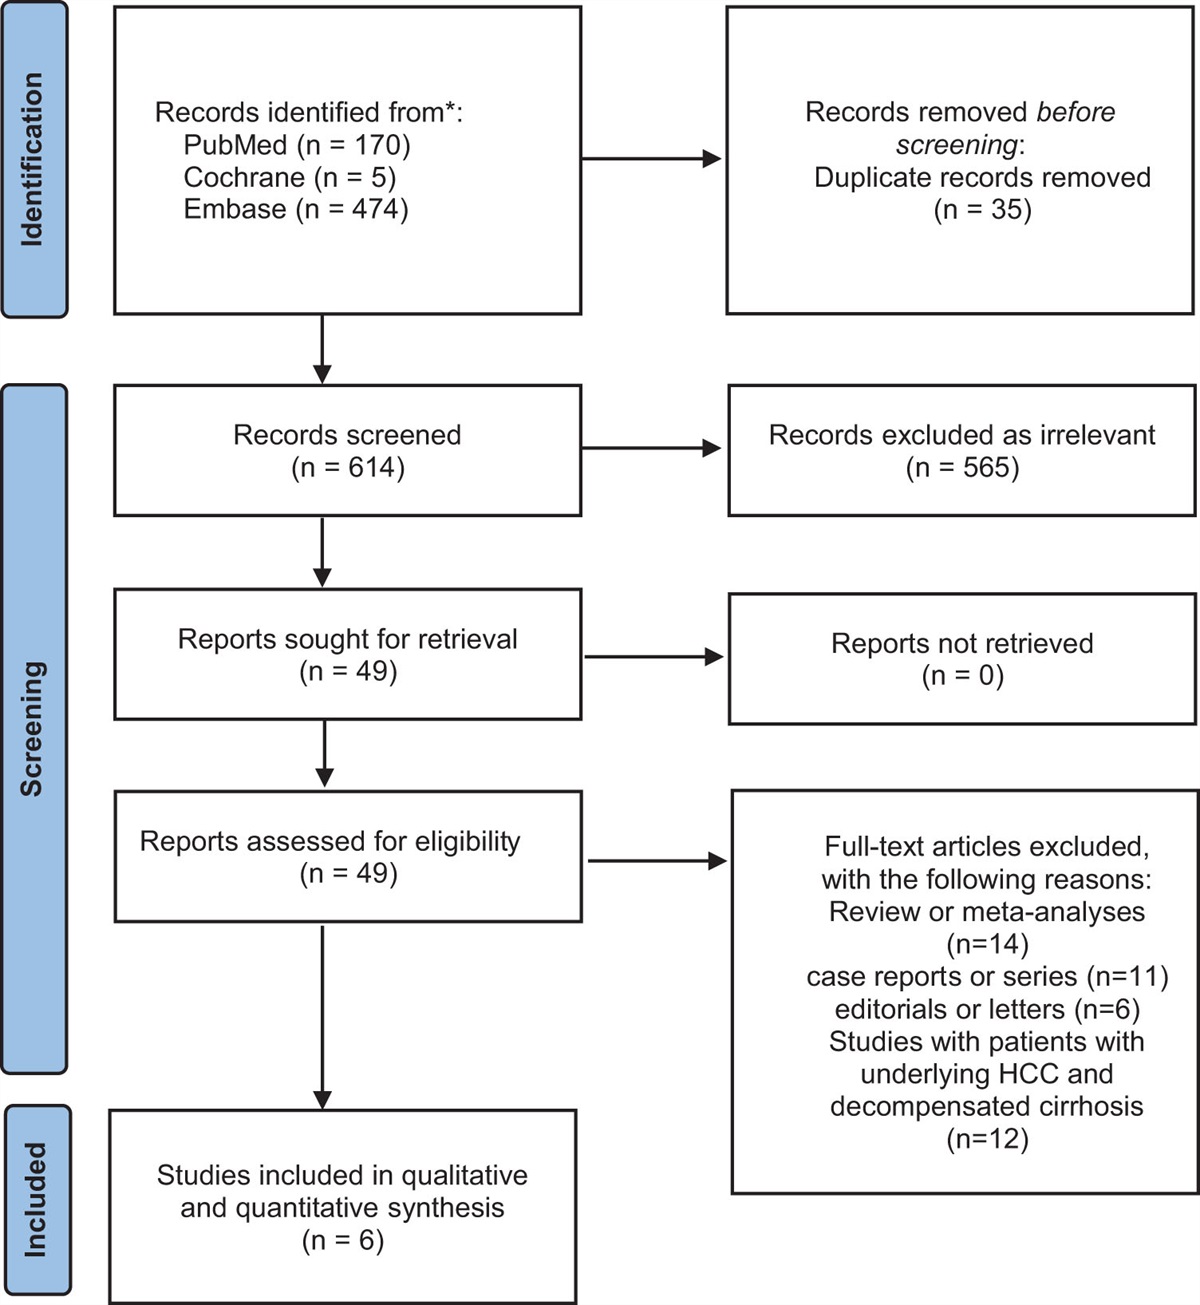 Clinical outcomes with metformin use in diabetic patients with compensated cirrhosis: a systematic review and meta-analysis